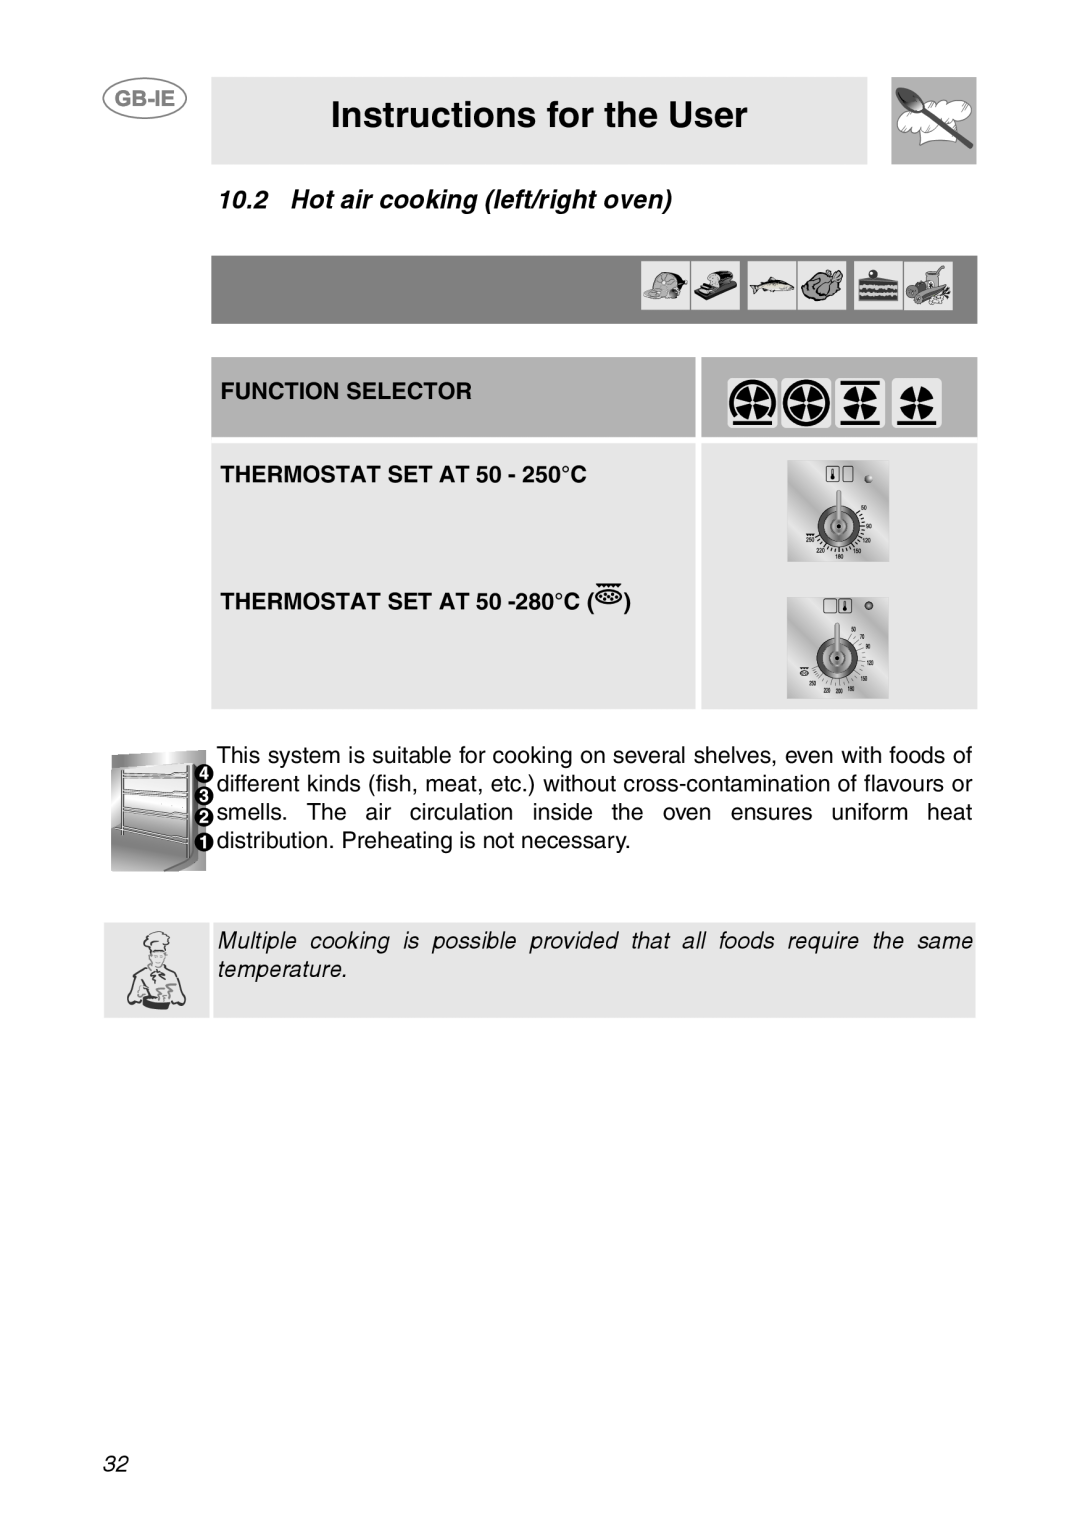 Smeg CS150SA Instructions for the User, Hot air cooking left/right oven, FUNCTION SELECTOR THERMOSTAT SET AT 50 - 250C 